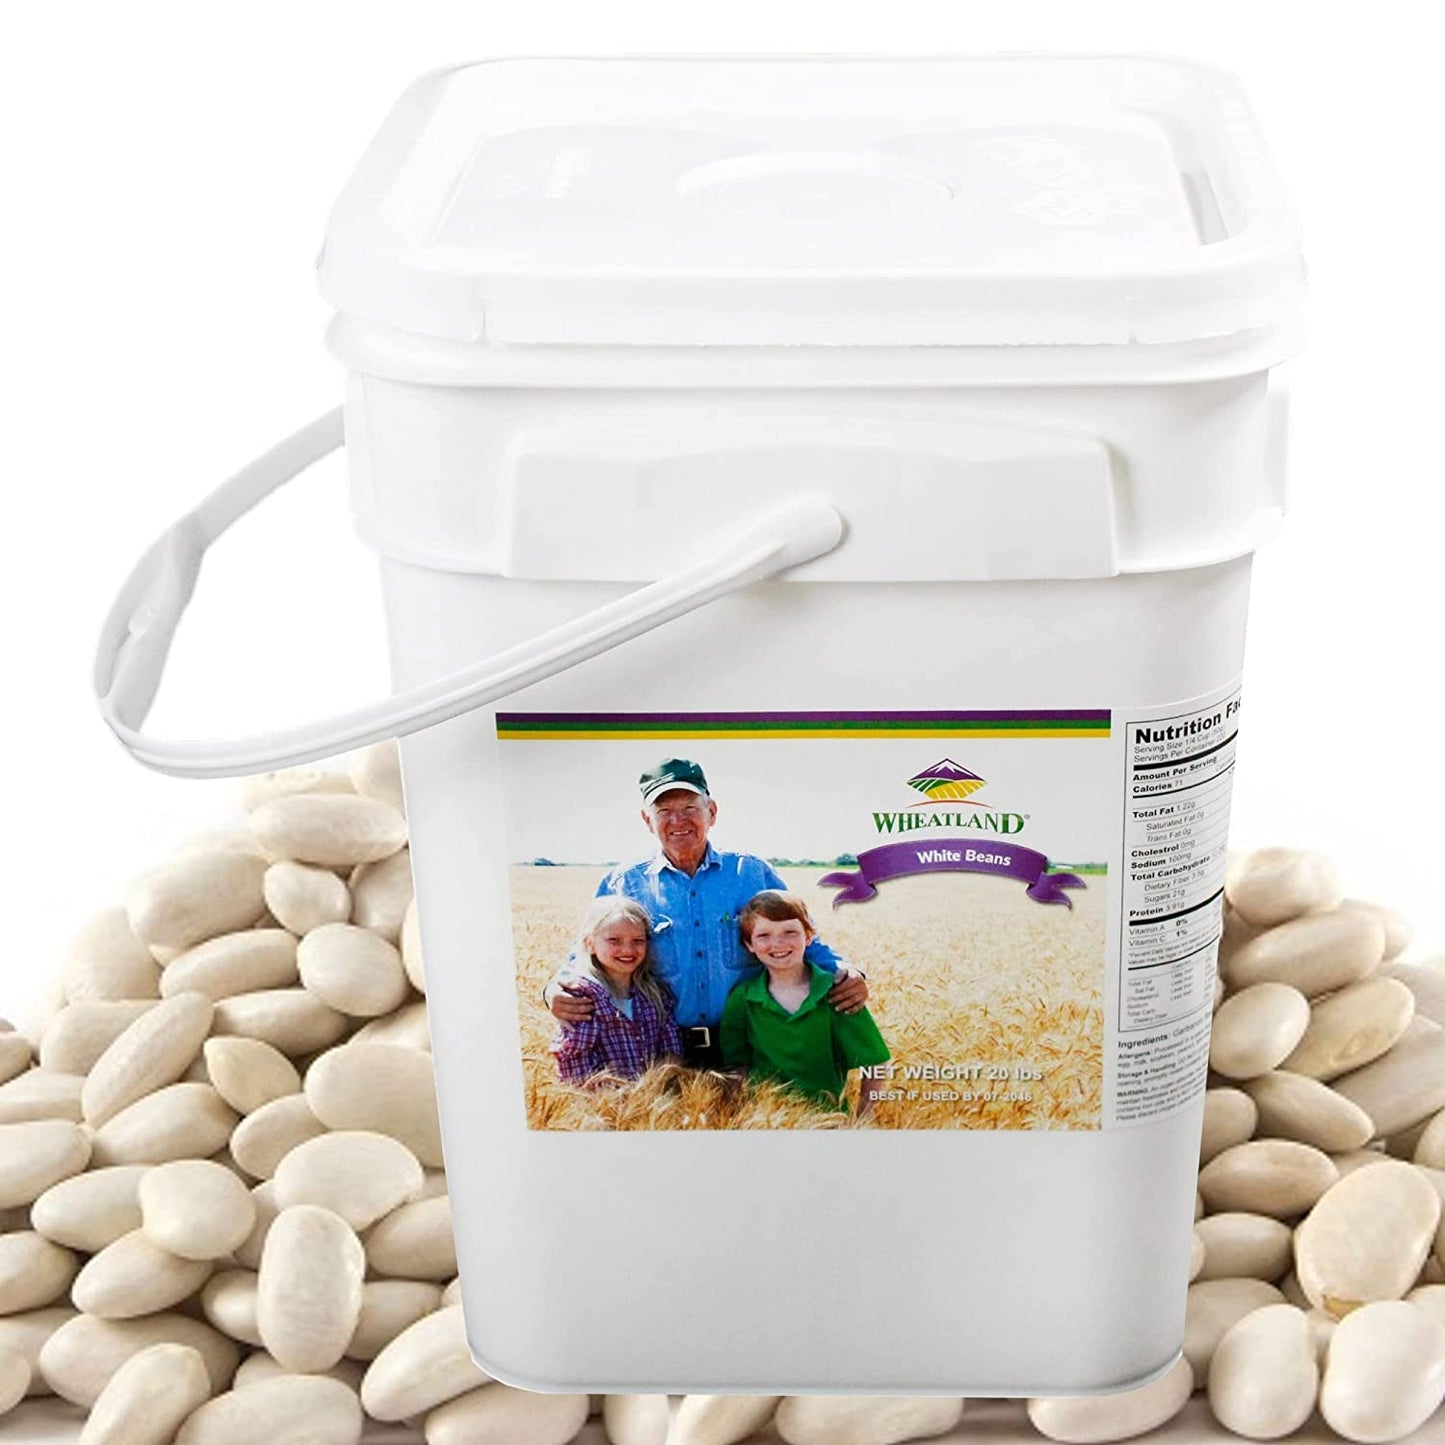 Wheatland™ White Beans "Navy Beans" • 20lb • Farm Fresh • 25 Year Shelf Life • Lab-tested ISO 17025 Verified Chemical-Free • Never Irradiated, no desiccants and non GMO • High Trust Seller • 40 Year Legacy of Prepping